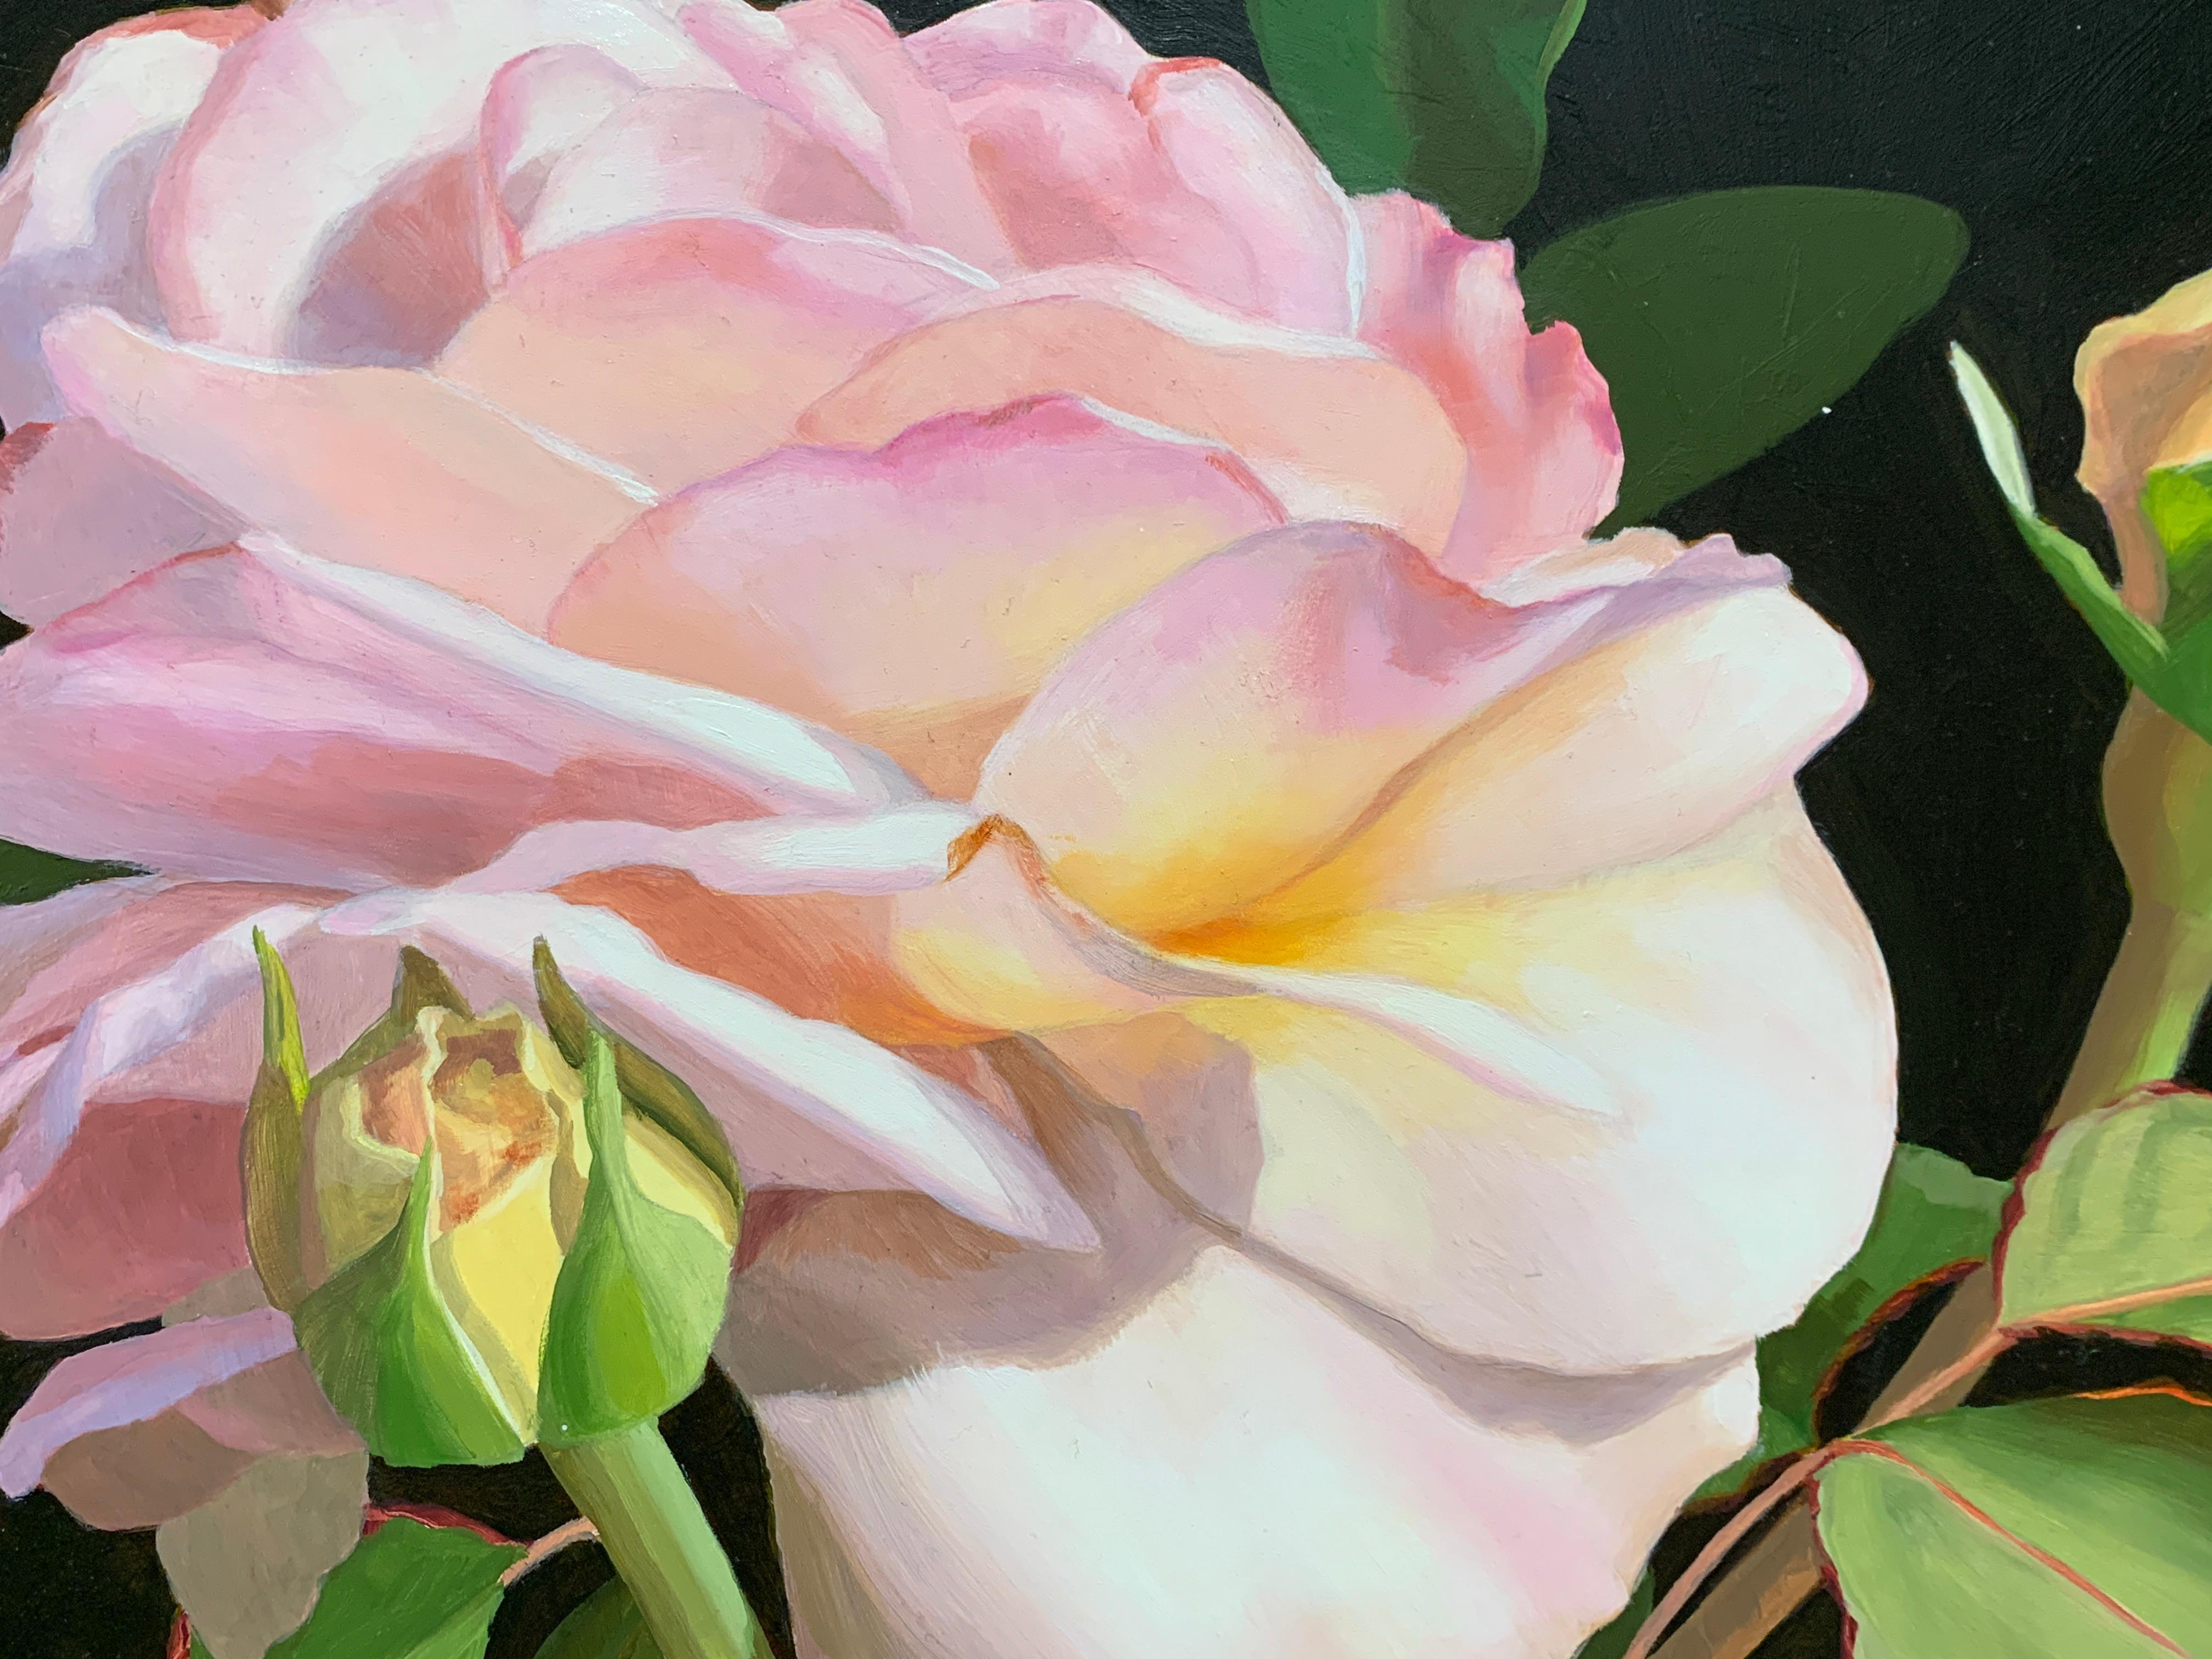 American Realist still life of Pink and Yellow Roses - Painting by Elizabeth Rickert